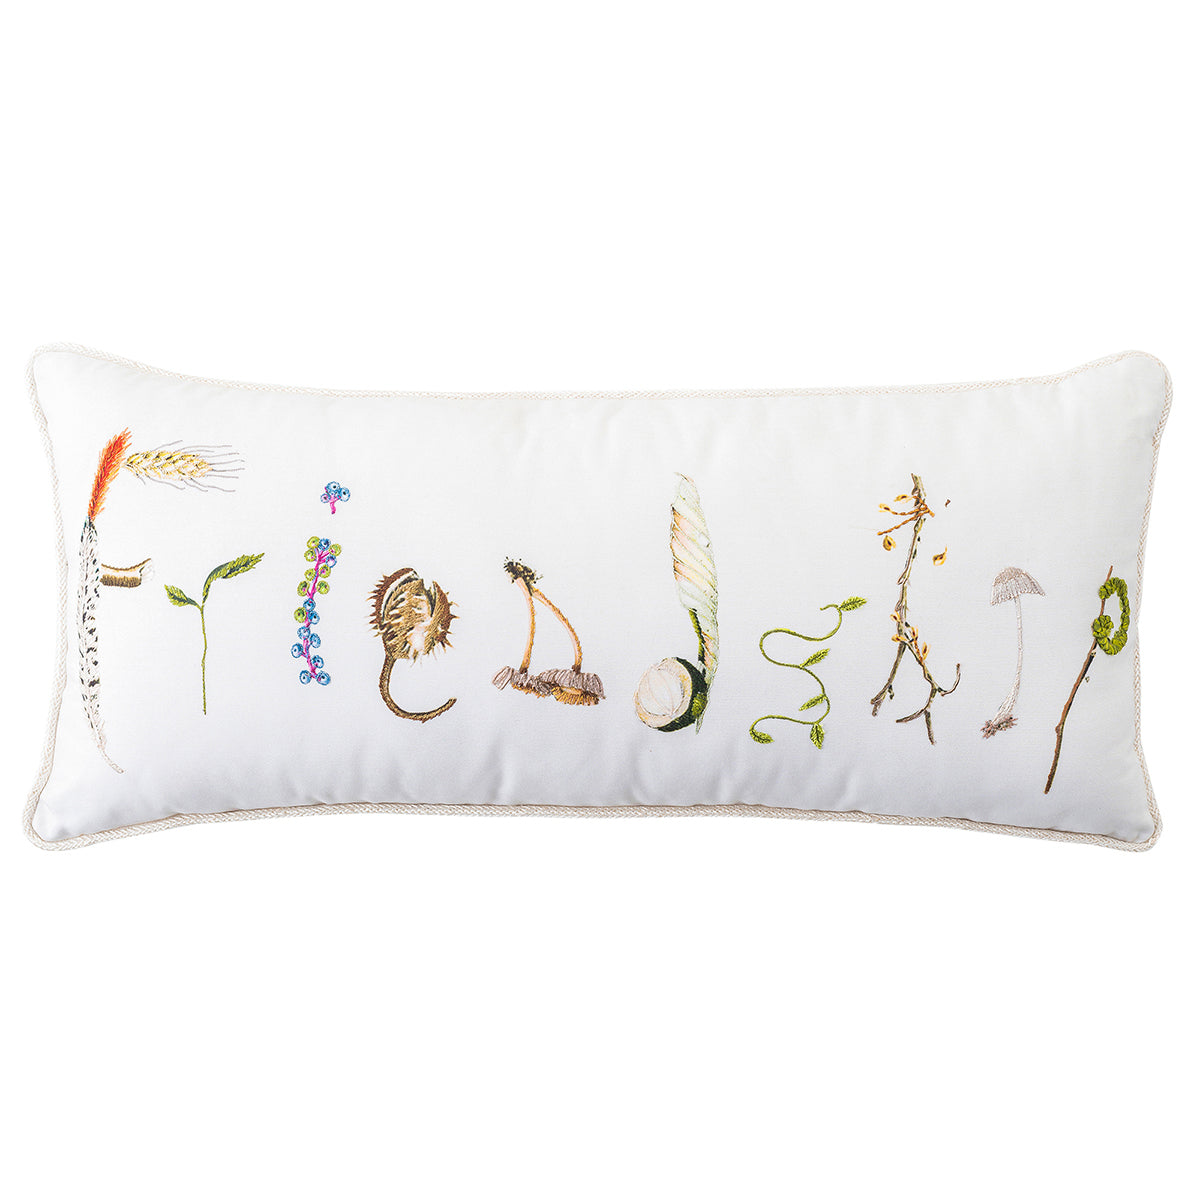 Featuring intricate embroidery to spell out one of our favorite sentiments of Friendship, our new collection of Forest Walk pillows are beautifully printed in vibrant colors and decorated with found treasures from the forest floor. Stuffed with 10% down and 90% feather fill.